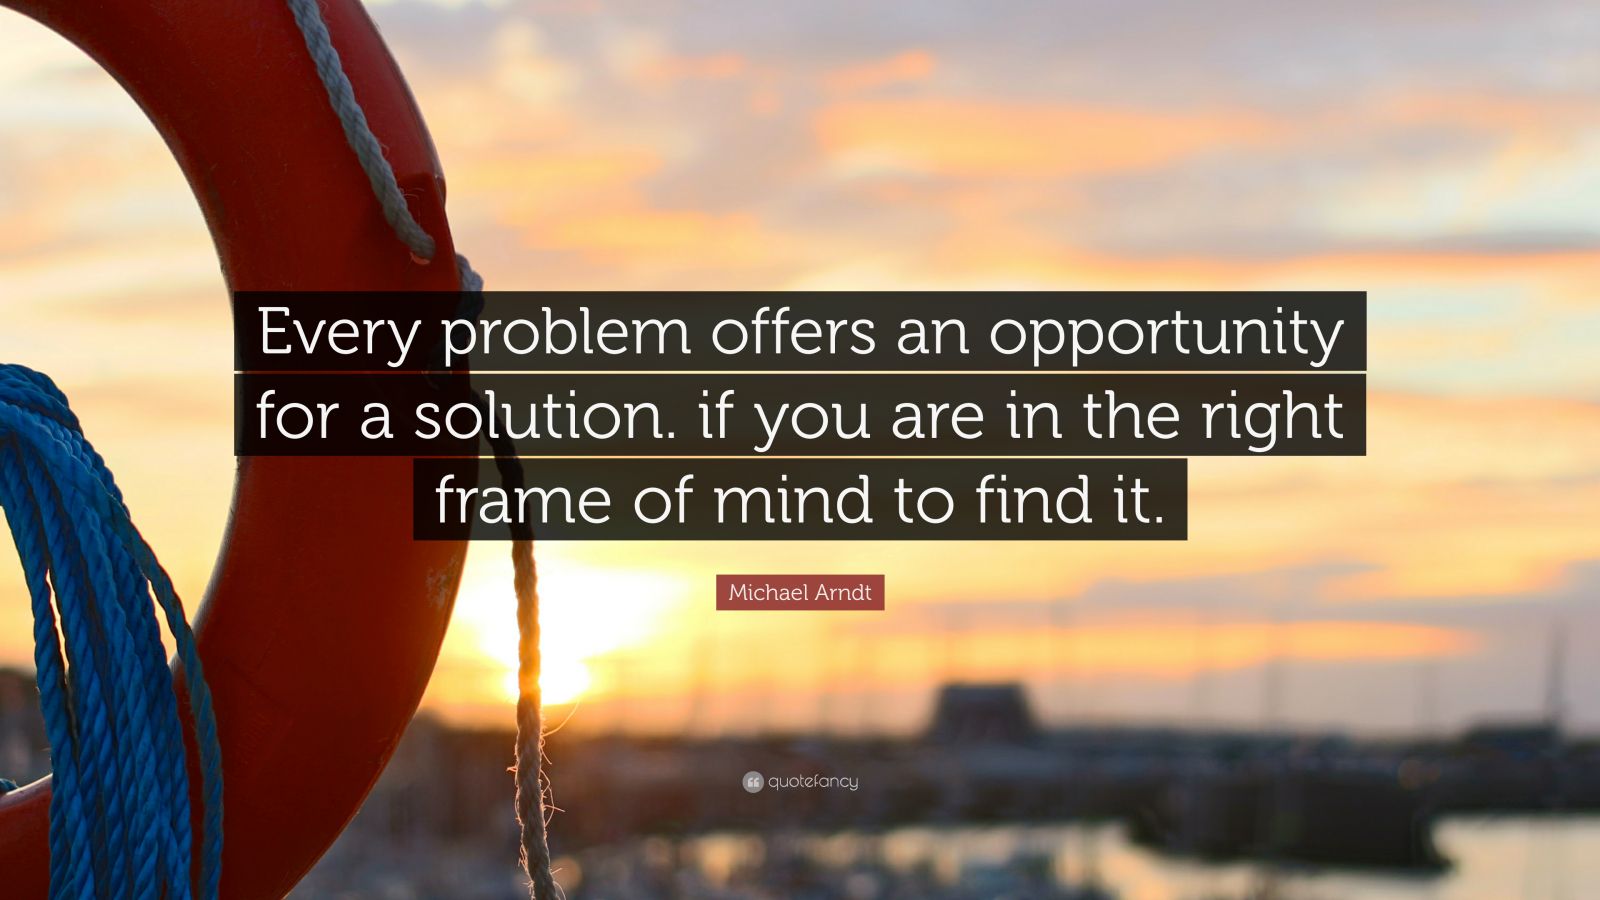 Michael Arndt Quote: “Every problem offers an opportunity for a solution. if you are in the right frame of mind to find it.”